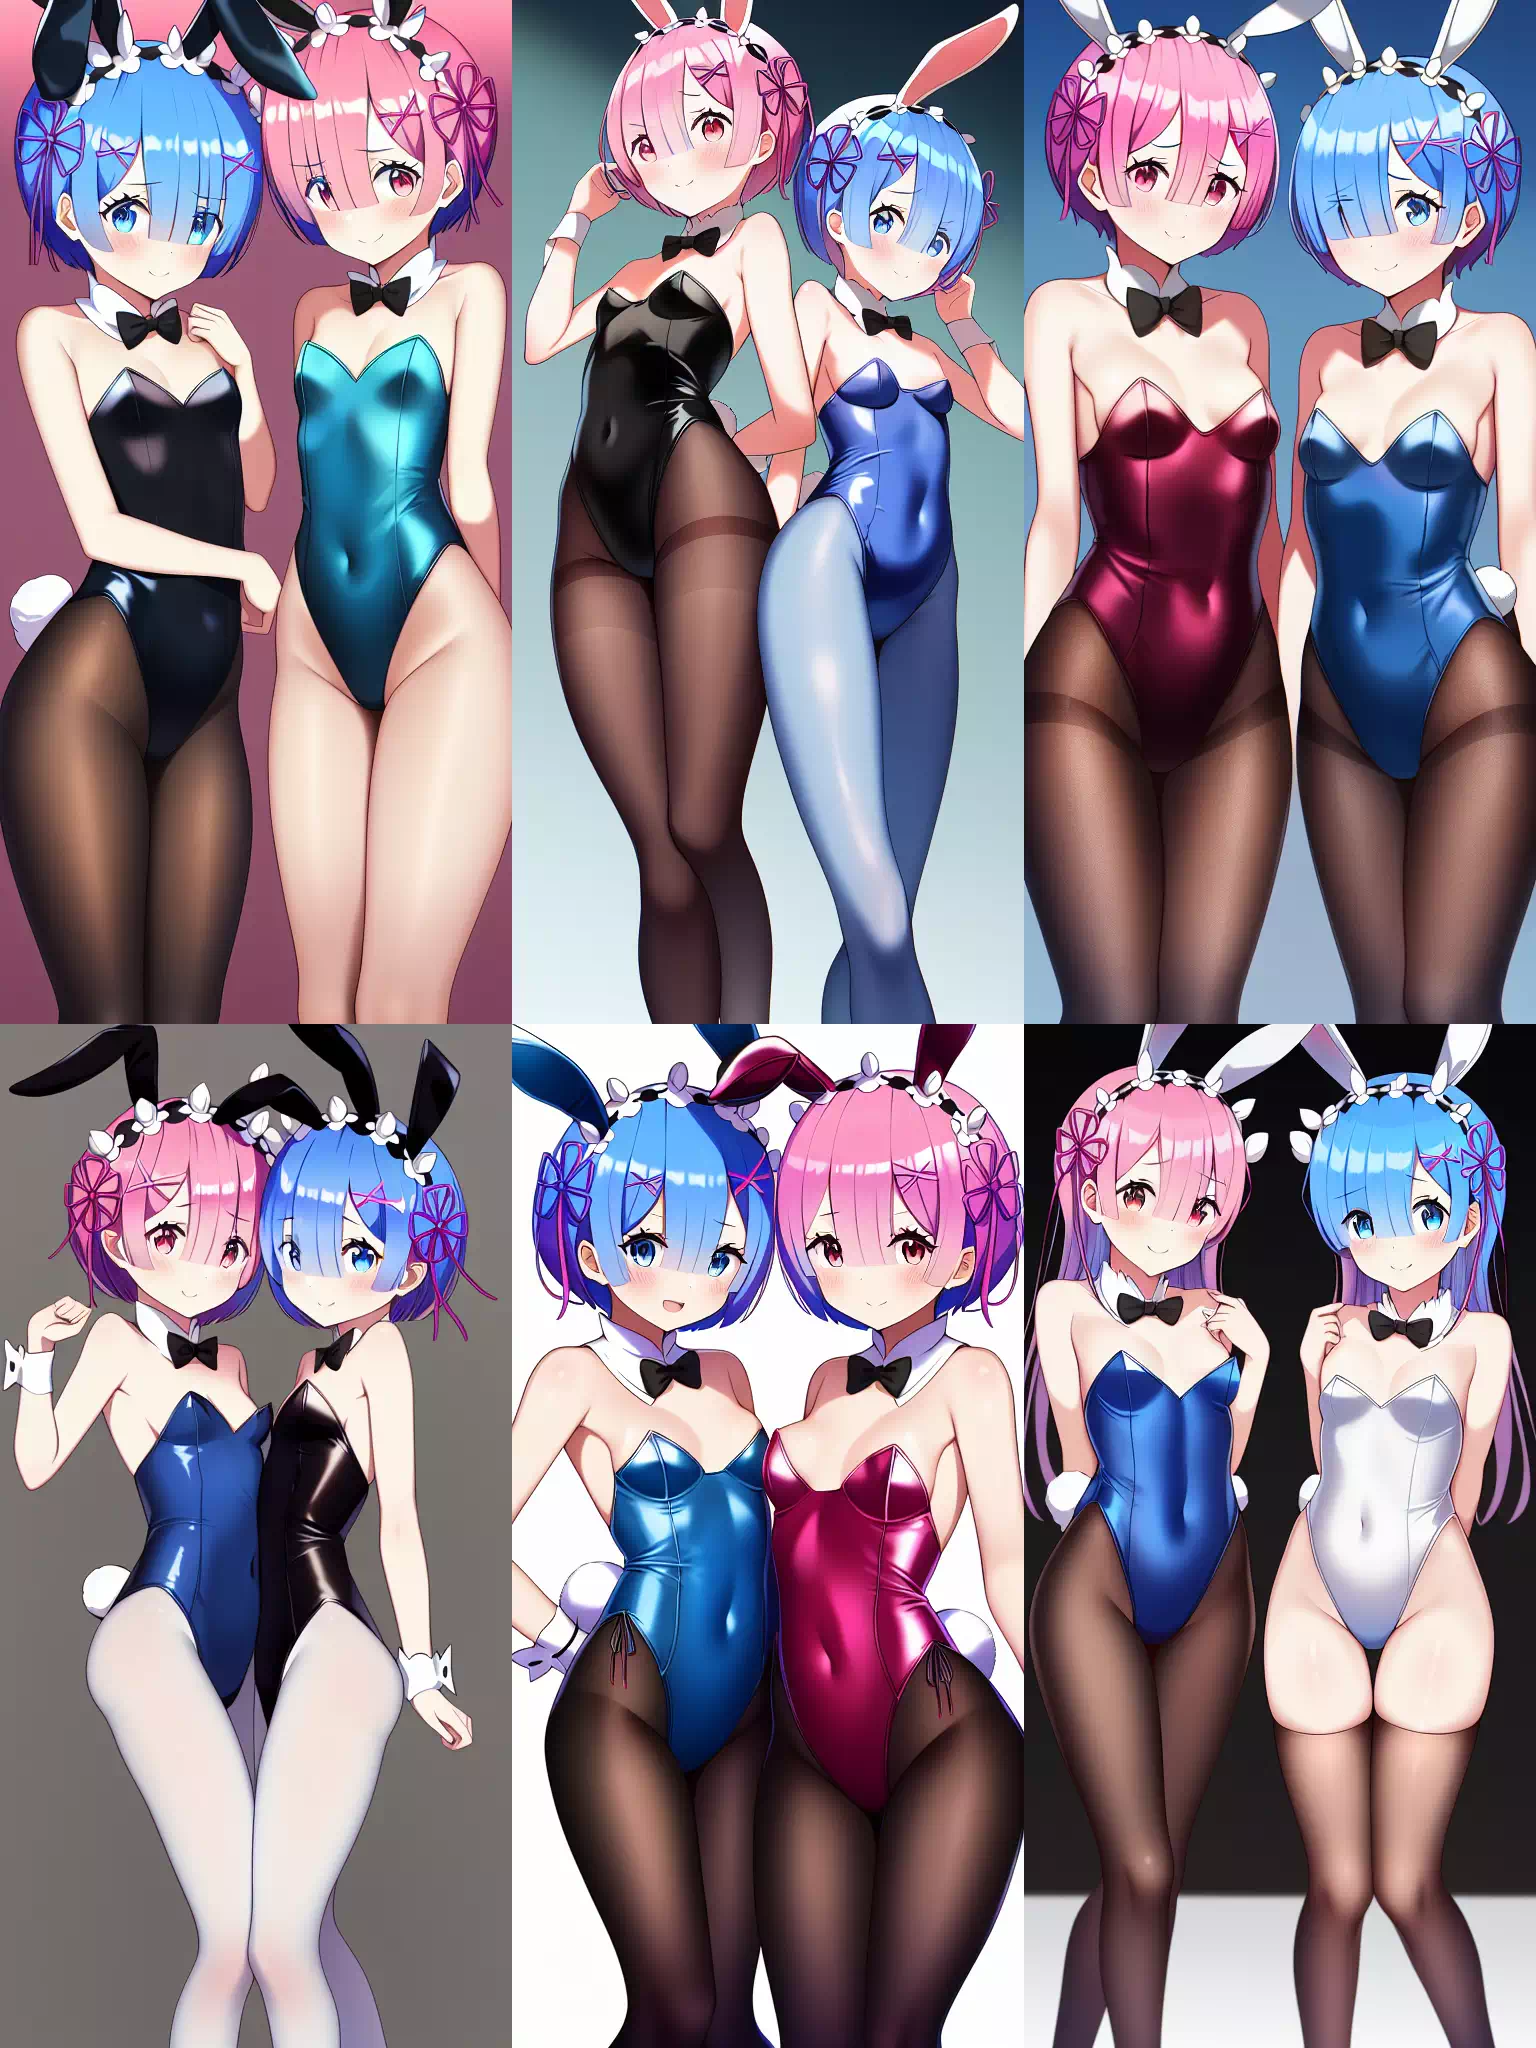 Rem and Ram bunny girls